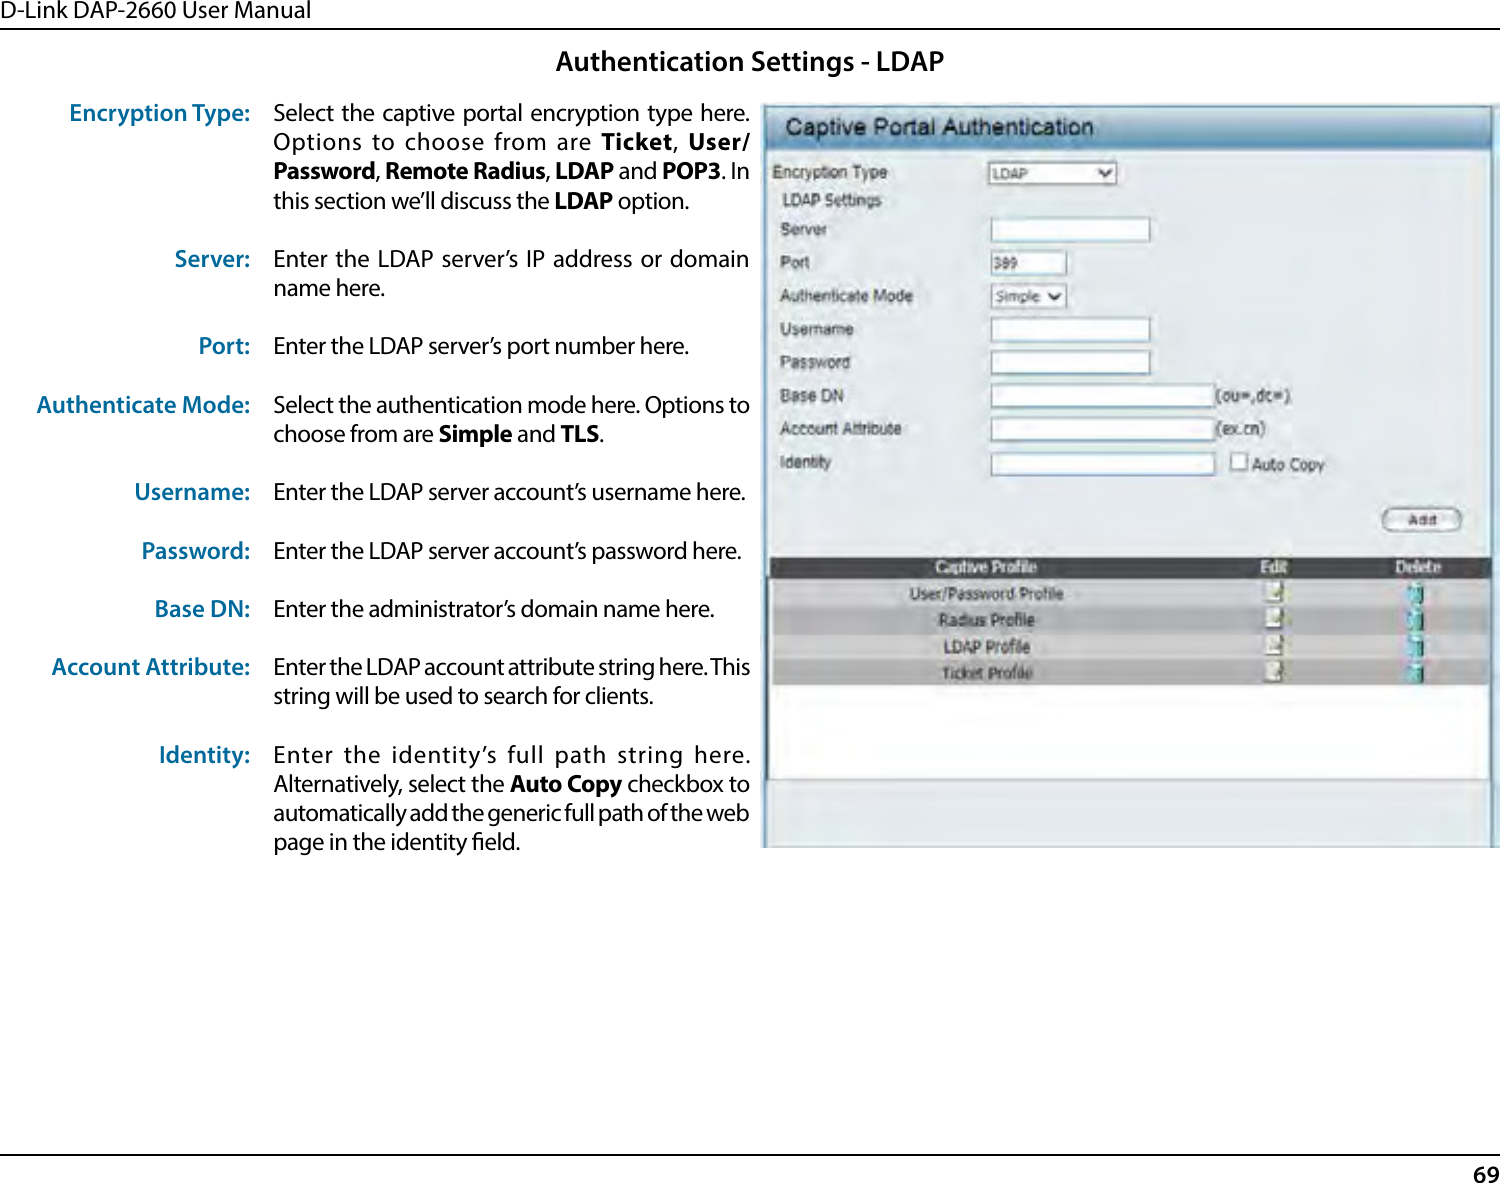 D-Link DAP-2660 User Manual69Encryption Type:Server:Port:Authenticate Mode:Username:Password:Base DN:Account Attribute:Identity:Select the captive portal encryption type here. Options to choose from are Ticket, User/Password, Remote Radius, LDAP and POP3. In this section we’ll discuss the LDAP option.Enter the LDAP server’s IP address or domain name here.Enter the LDAP server’s port number here.Select the authentication mode here. Options to choose from are Simple and TLS.Enter the LDAP server account’s username here.Enter the LDAP server account’s password here.Enter the administrator’s domain name here.Enter the LDAP account attribute string here. This string will be used to search for clients.Enter the identity’s full path string here. Alternatively, select the Auto Copy checkbox to automatically add the generic full path of the web page in the identity eld.Authentication Settings - LDAP